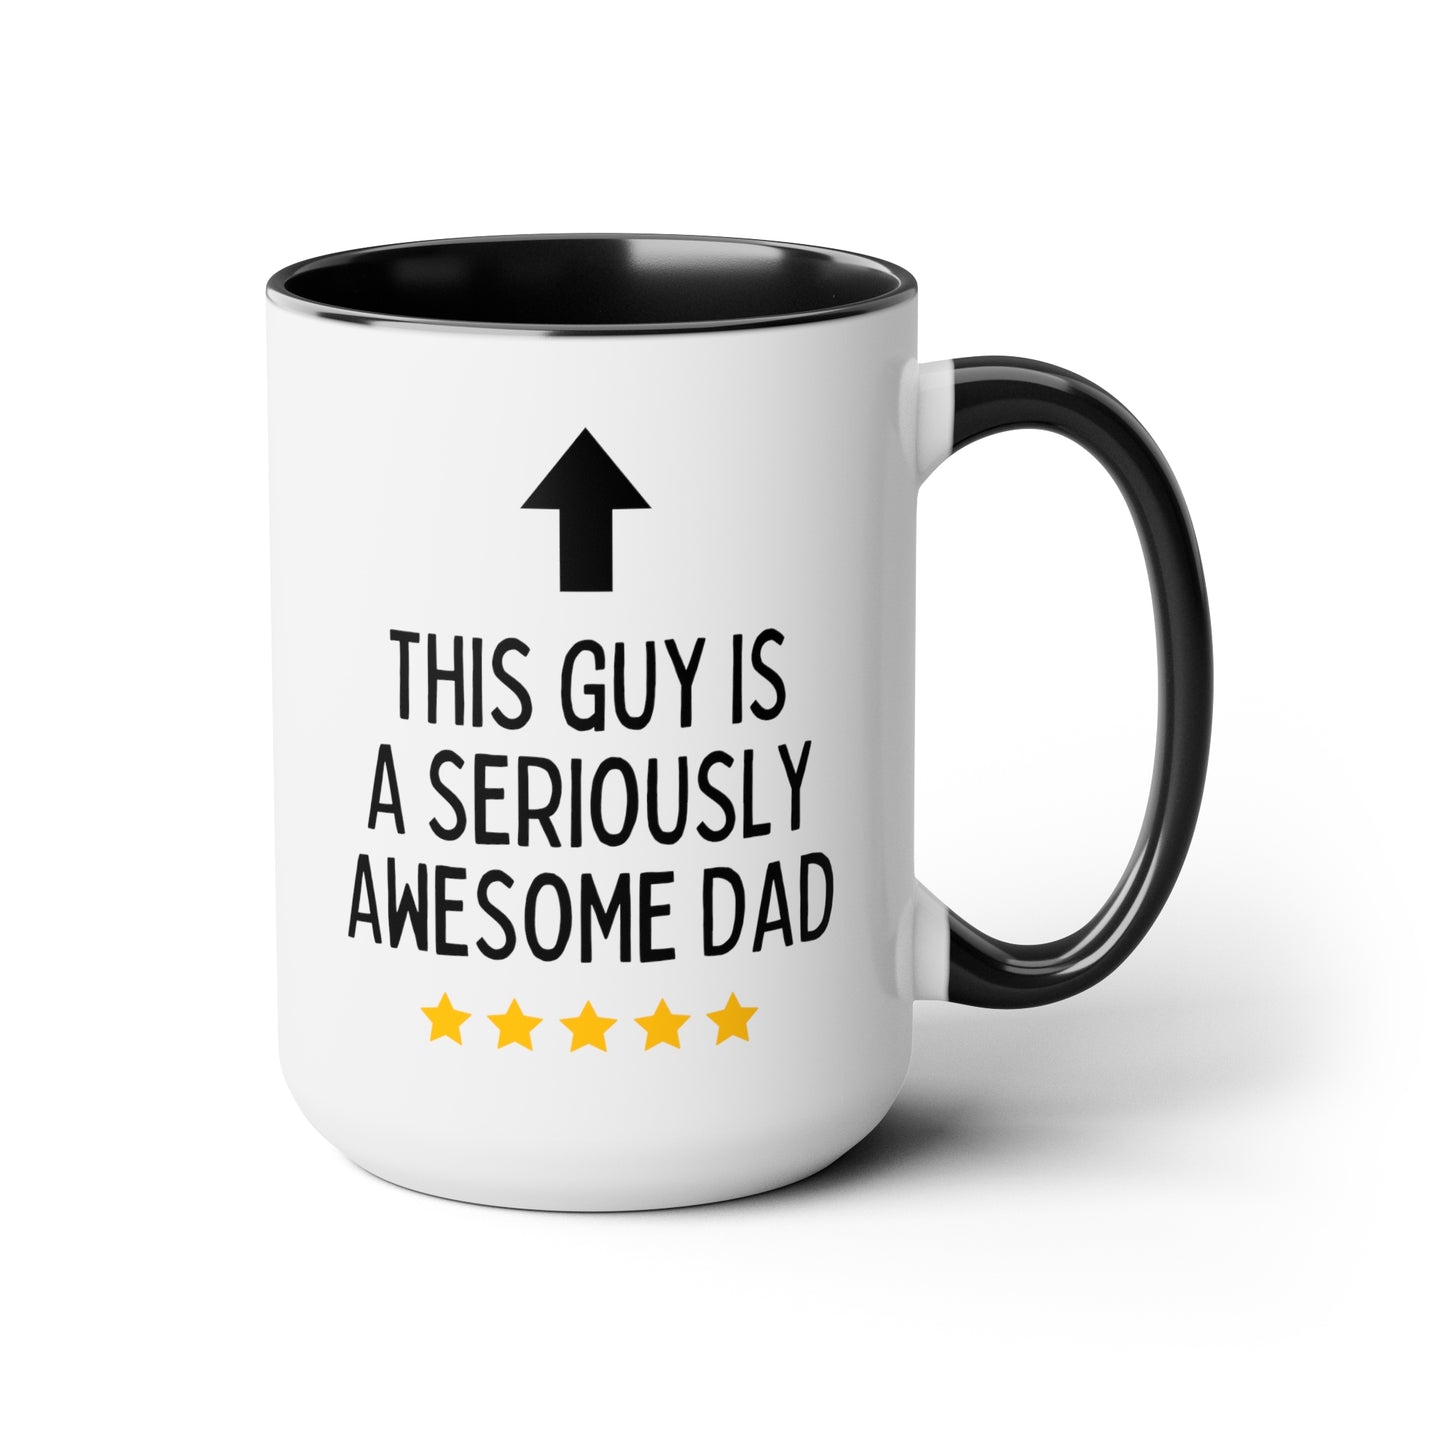 This Guy Is One Awesome Dad 15oz white with black accent funny large coffee mug gift for best papa father father's day grandfather waveywares wavey wares wavywares wavy wares